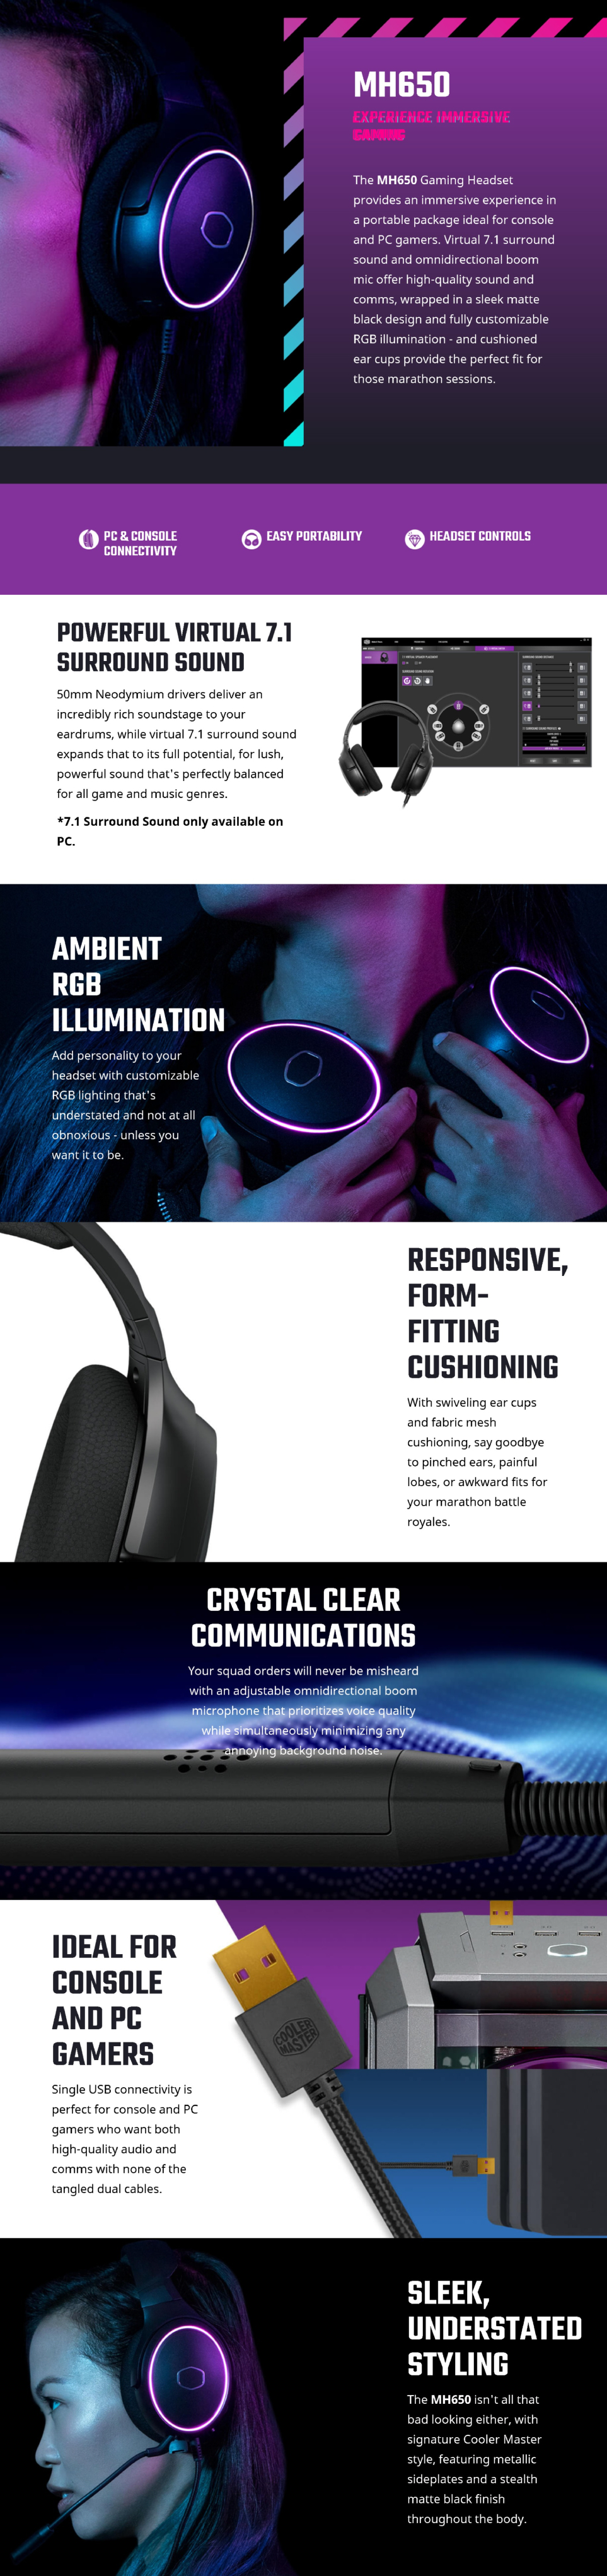 Cooler Master MH650 / MH-650 RGB Gaming Headset Virtual 7.1 Surround Omnidirectional Mic & USB Connectivity : NB Plaza